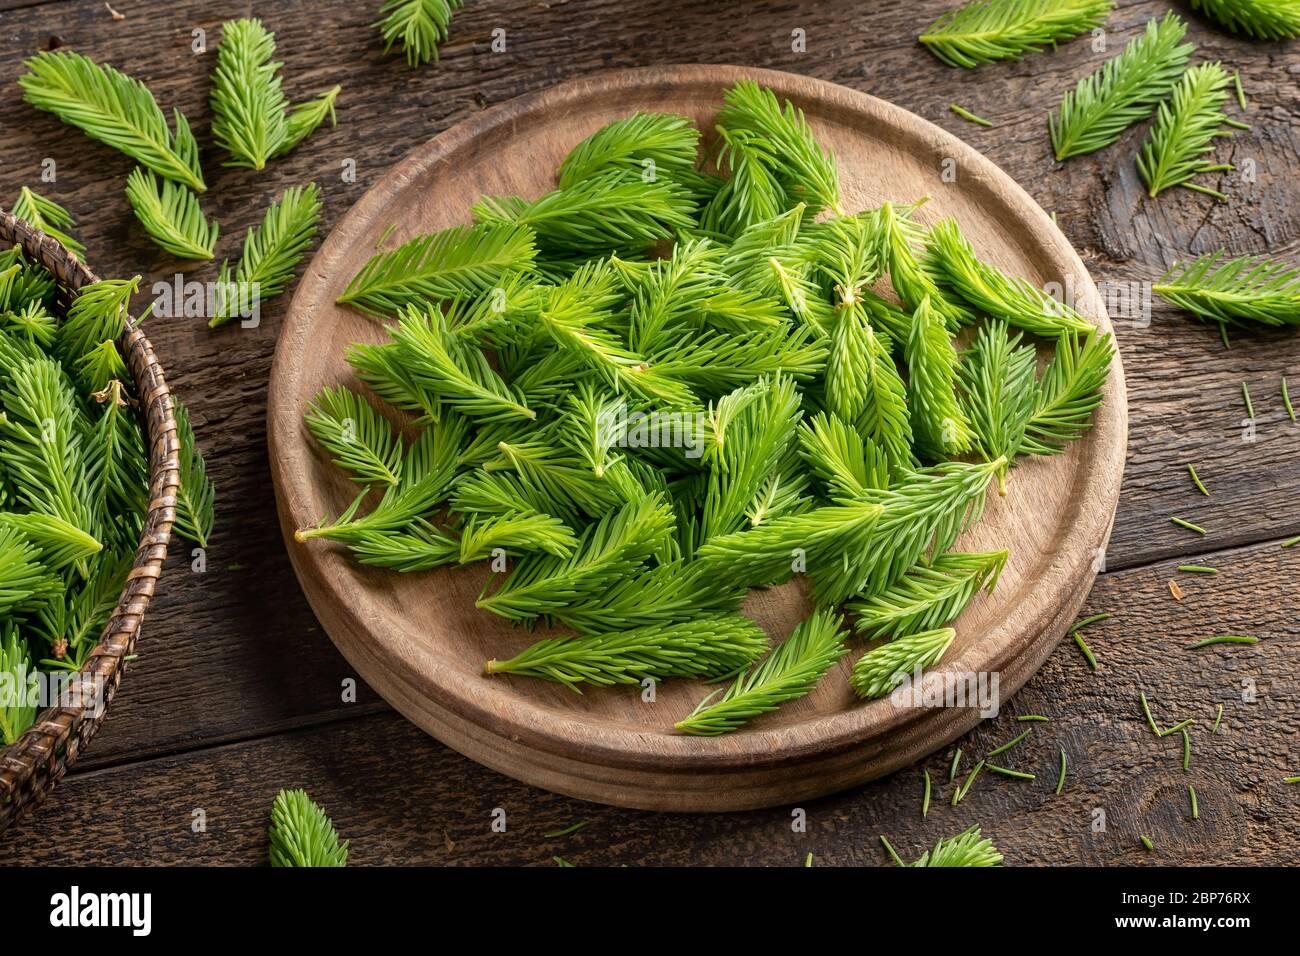 Young spruce tips collected to prepare homemade syrup Stock Photo